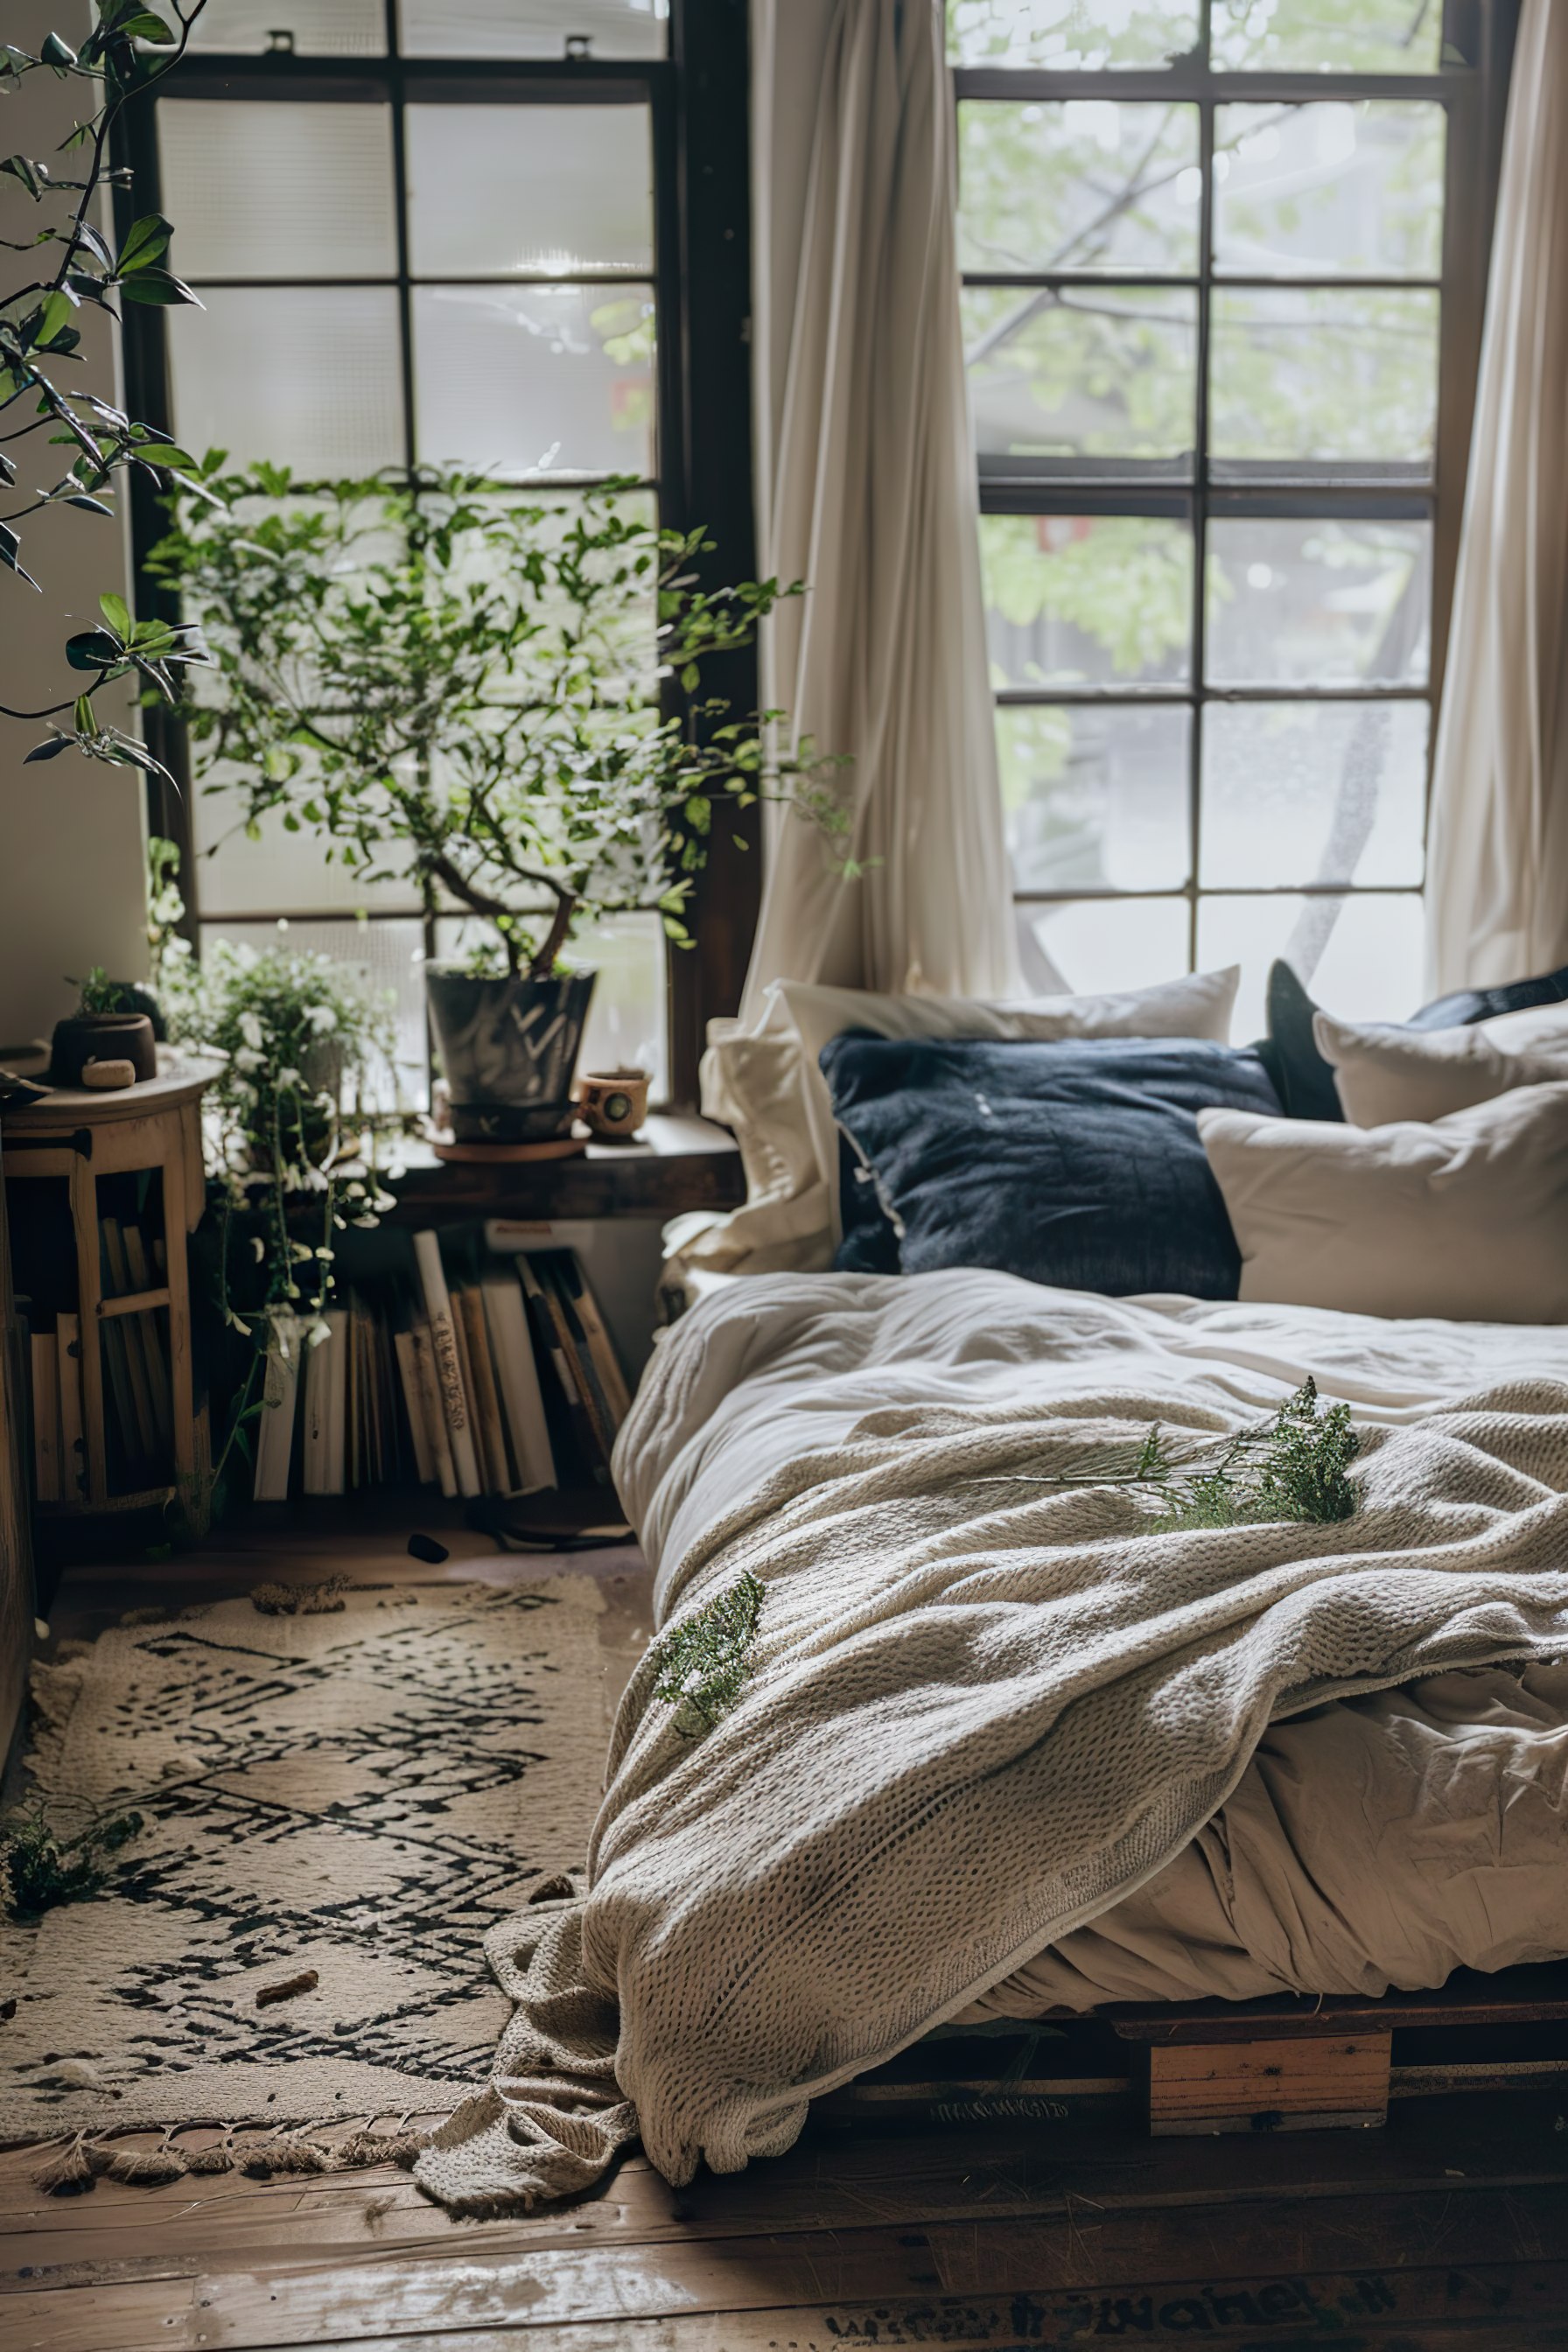 Cozy bedroom interior with an unmade bed, plush blankets, books, plants, and a window with flowing curtains.